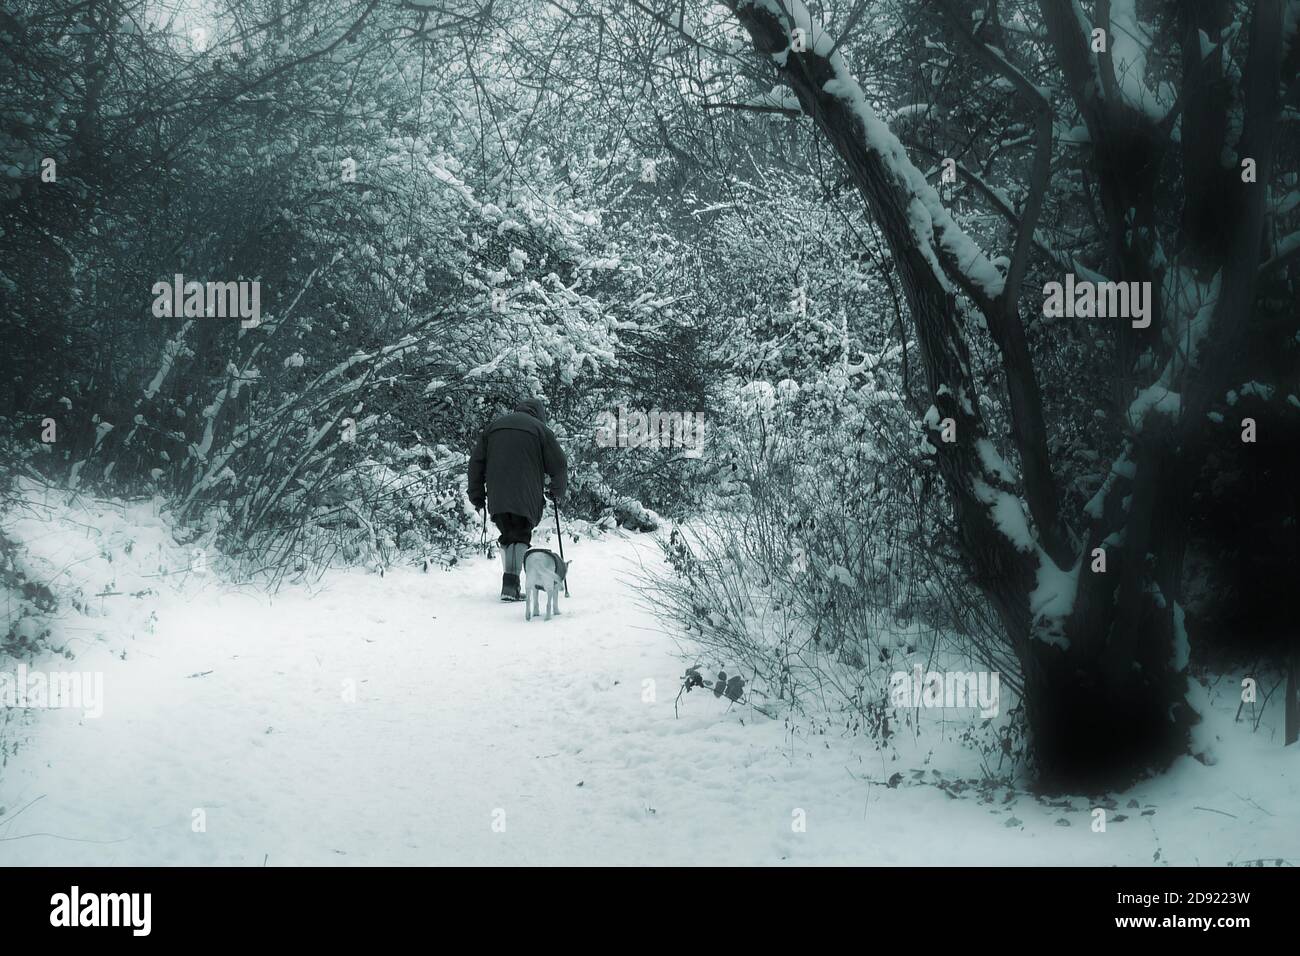 Almost Home - Winterspaziergang Stockfoto